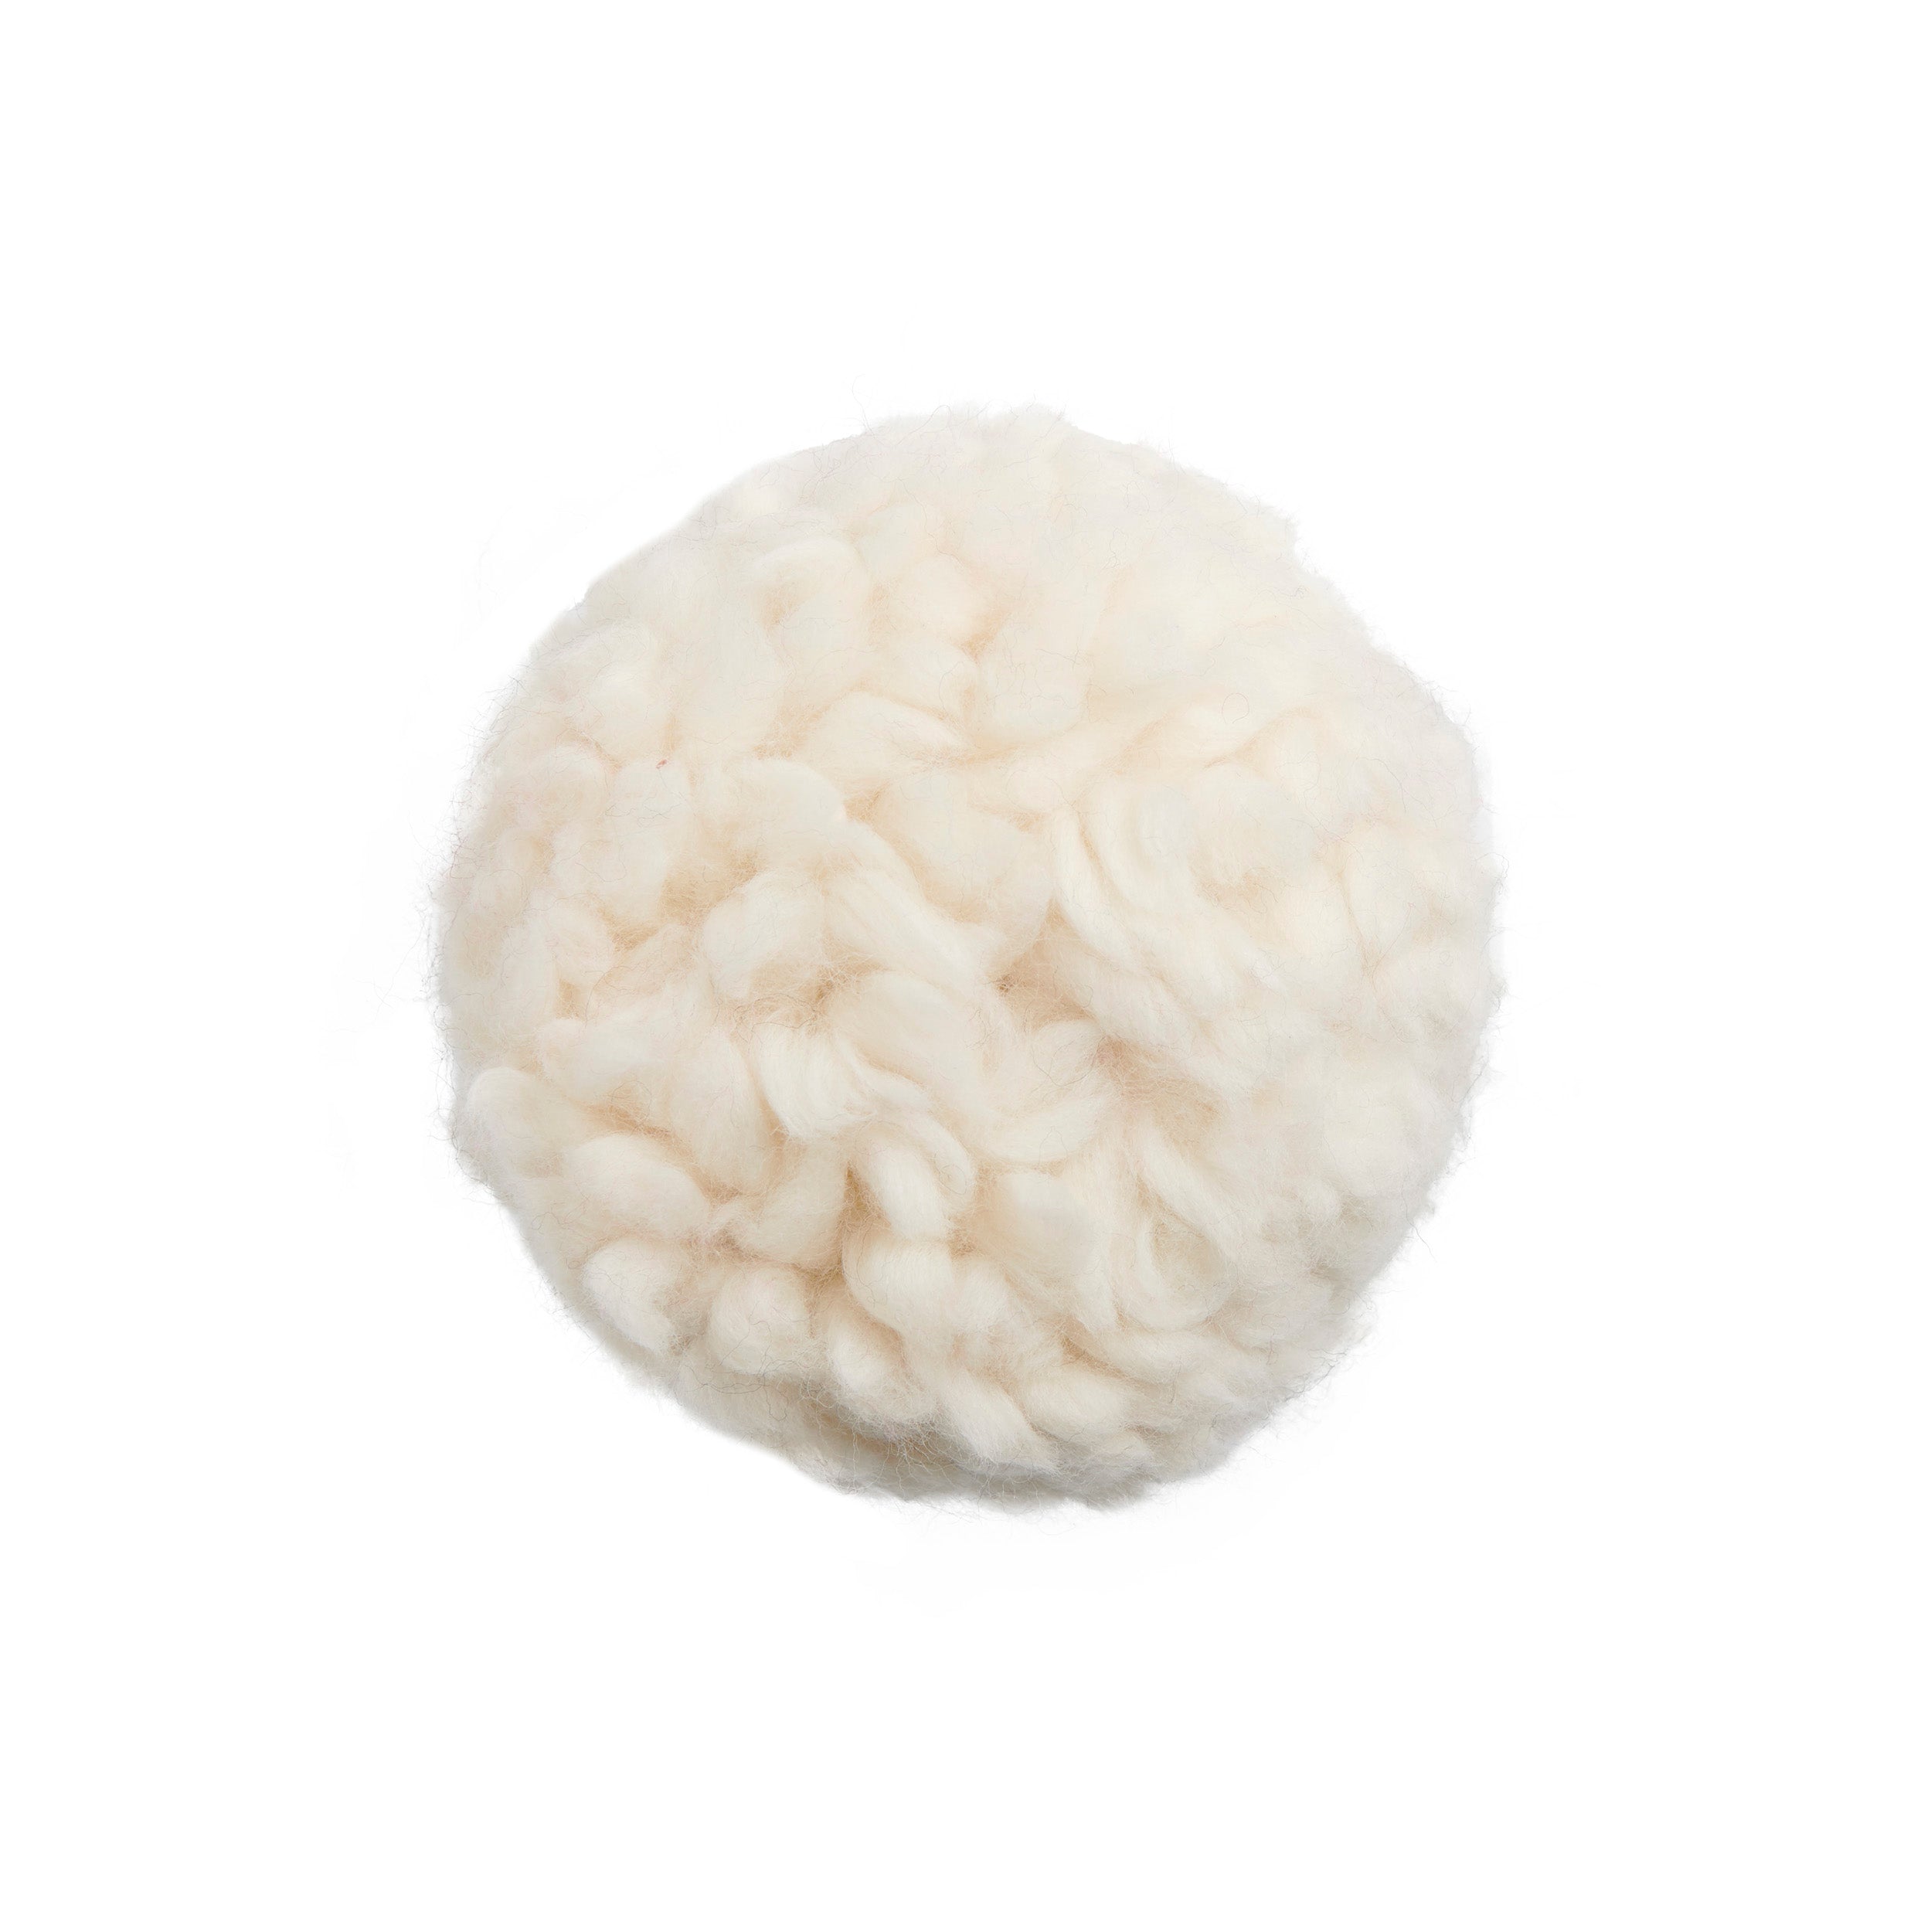  Darn Good Yarn Faux Fur DIY Pom Pom Kit, Craft kit Makes 2  snap on Pompoms for Knitted Yarn Hats, Crocheted Accessories